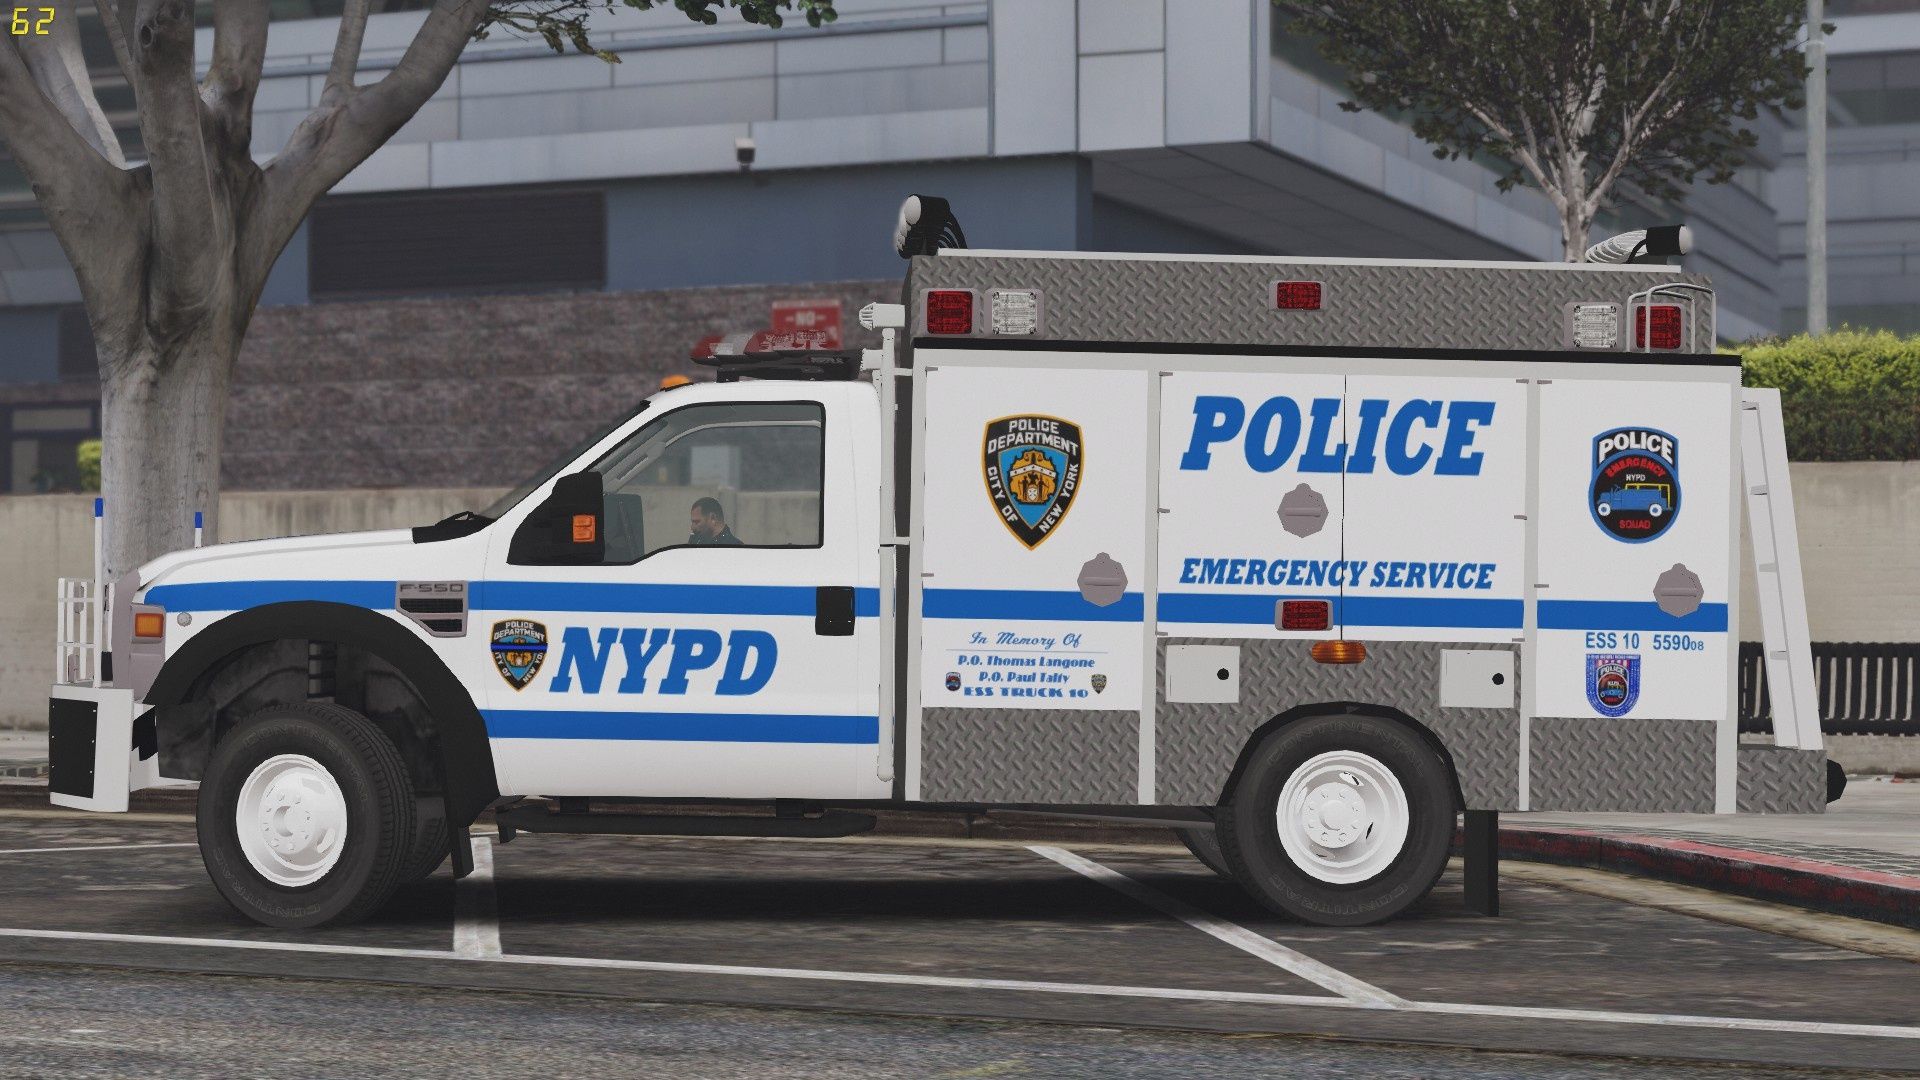 NYPD ESU Emergency Service Squad 10 REP Ford F 550 With Better Engine SFX